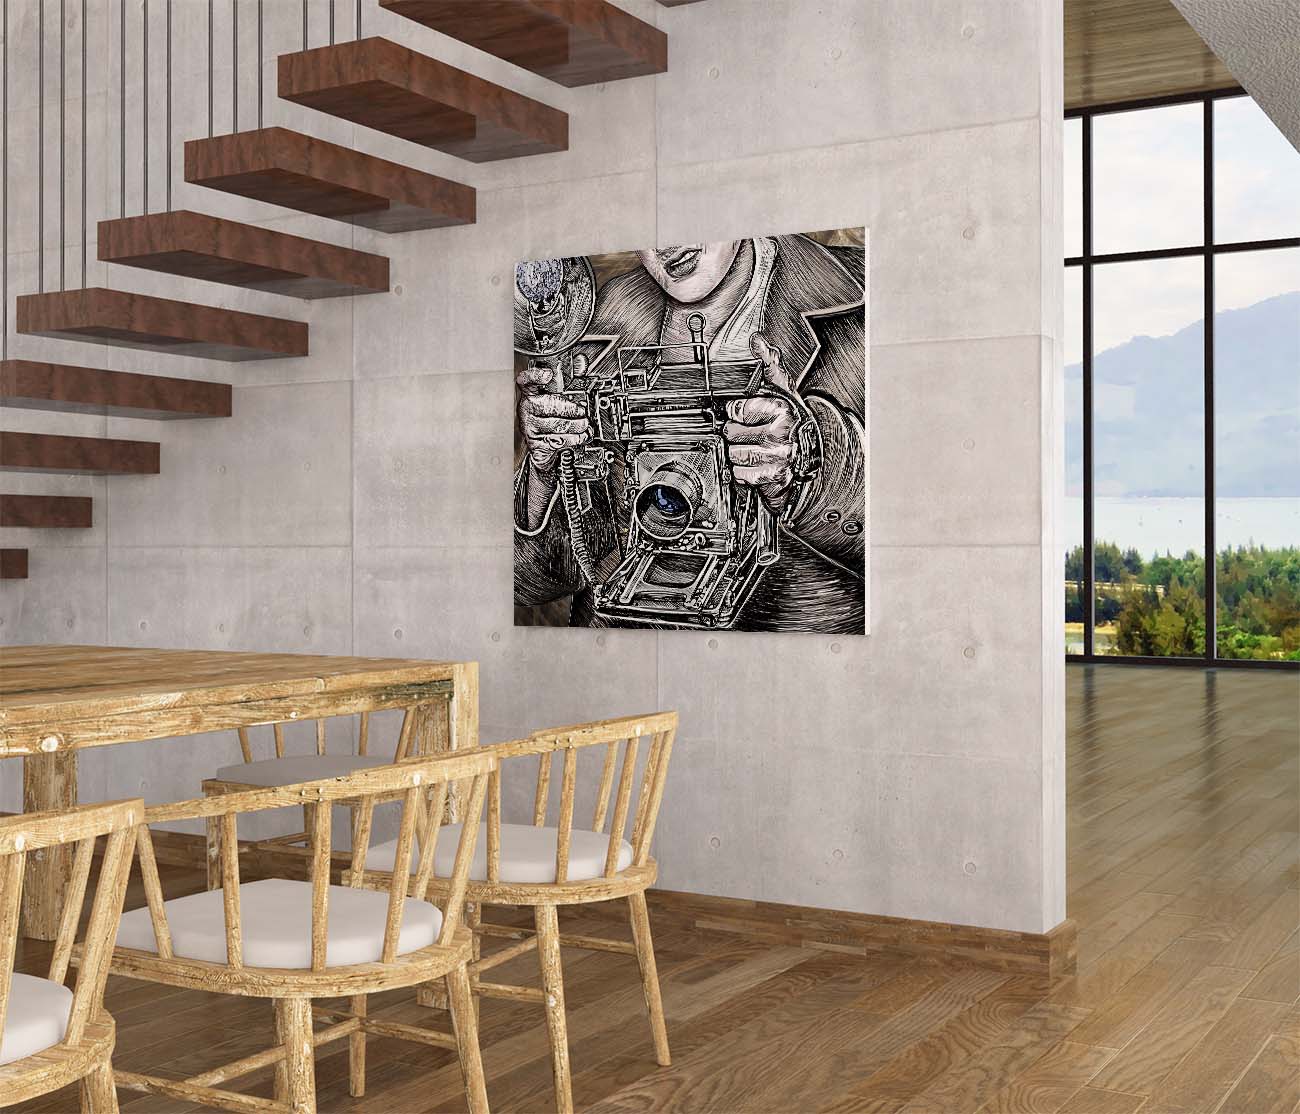 Camera King Close View ink illustration by Doug LaRue on a kitchen wall